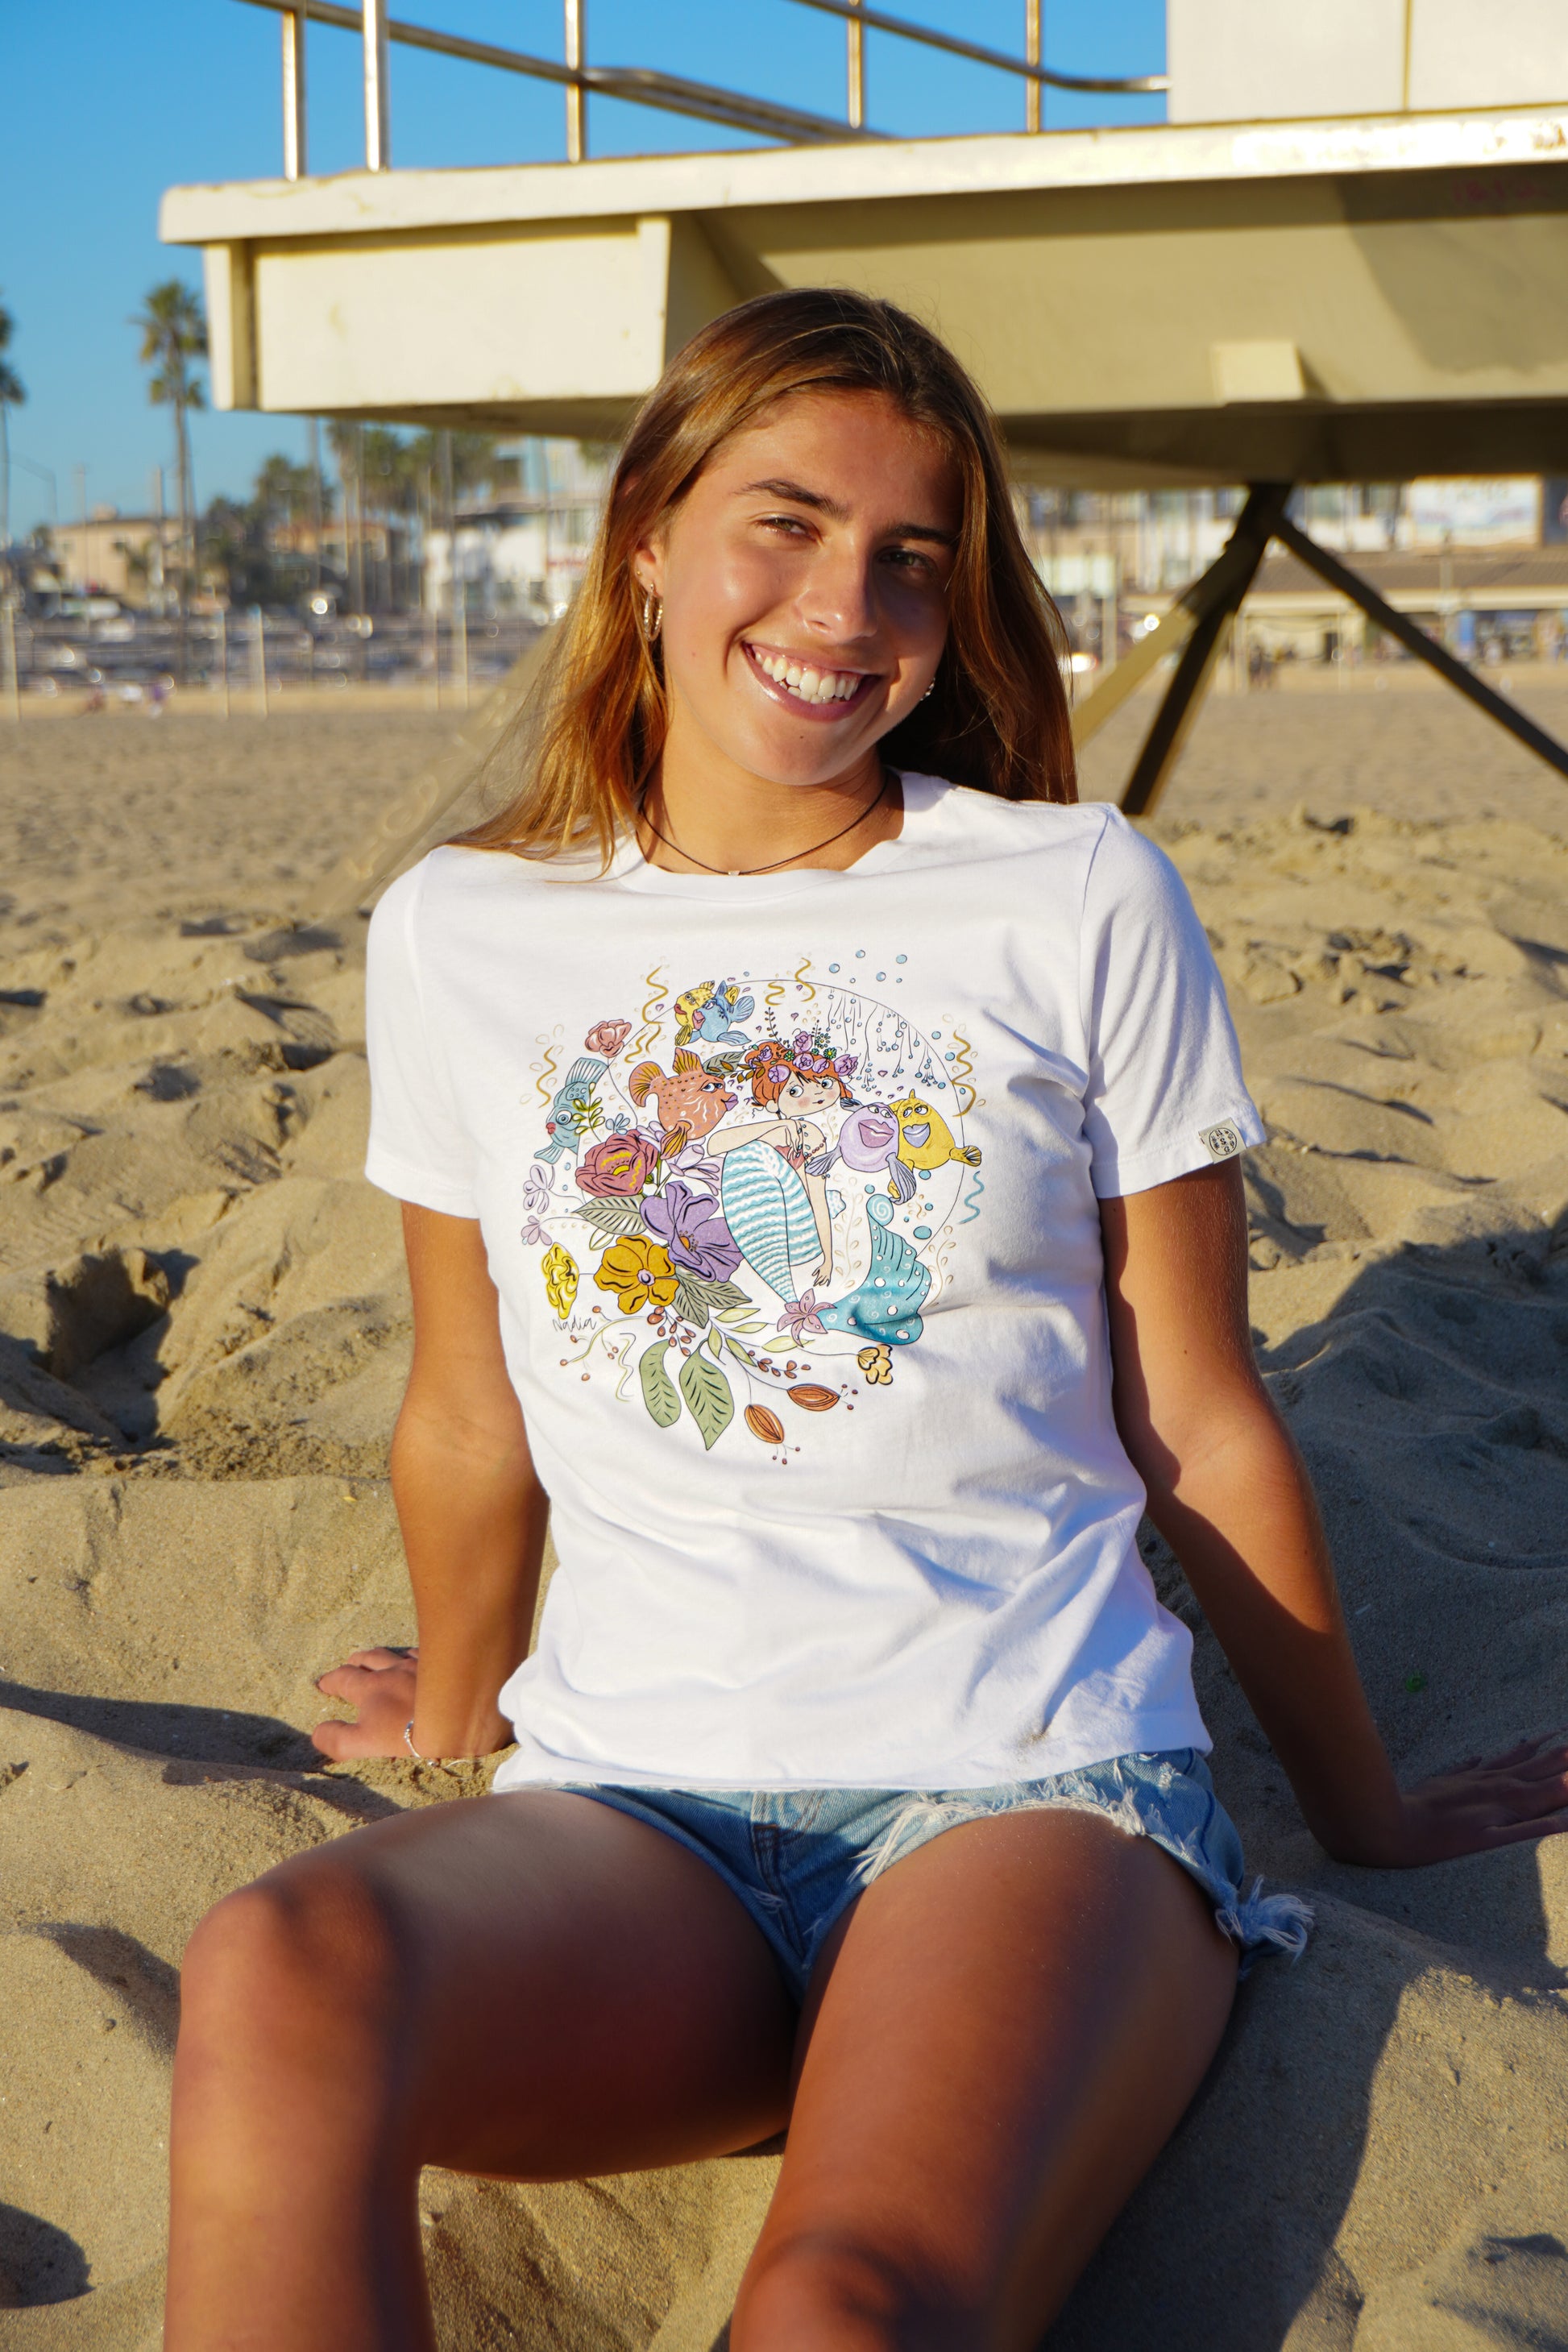 Cute mermaid tee for women. Illustration of a mermaid and funny fish  printed on cotton tee. Handmade by a local artist